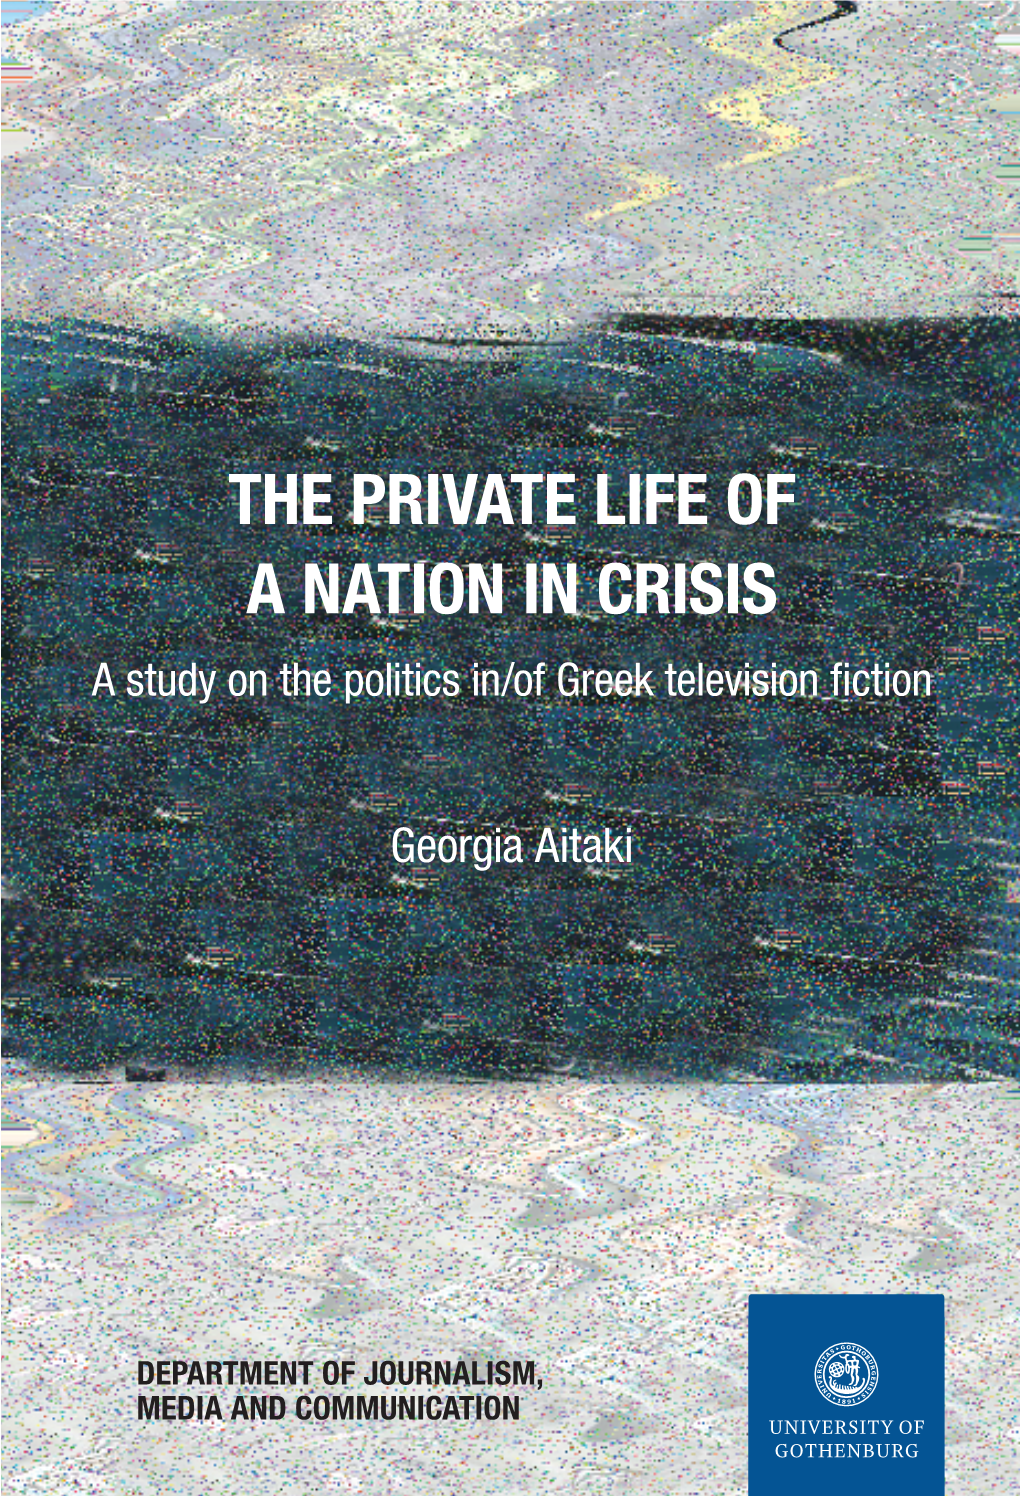 THE PRIVATE LIFE of a NATION in CRISIS a Study on the Politics In/Of Greek Television Fiction